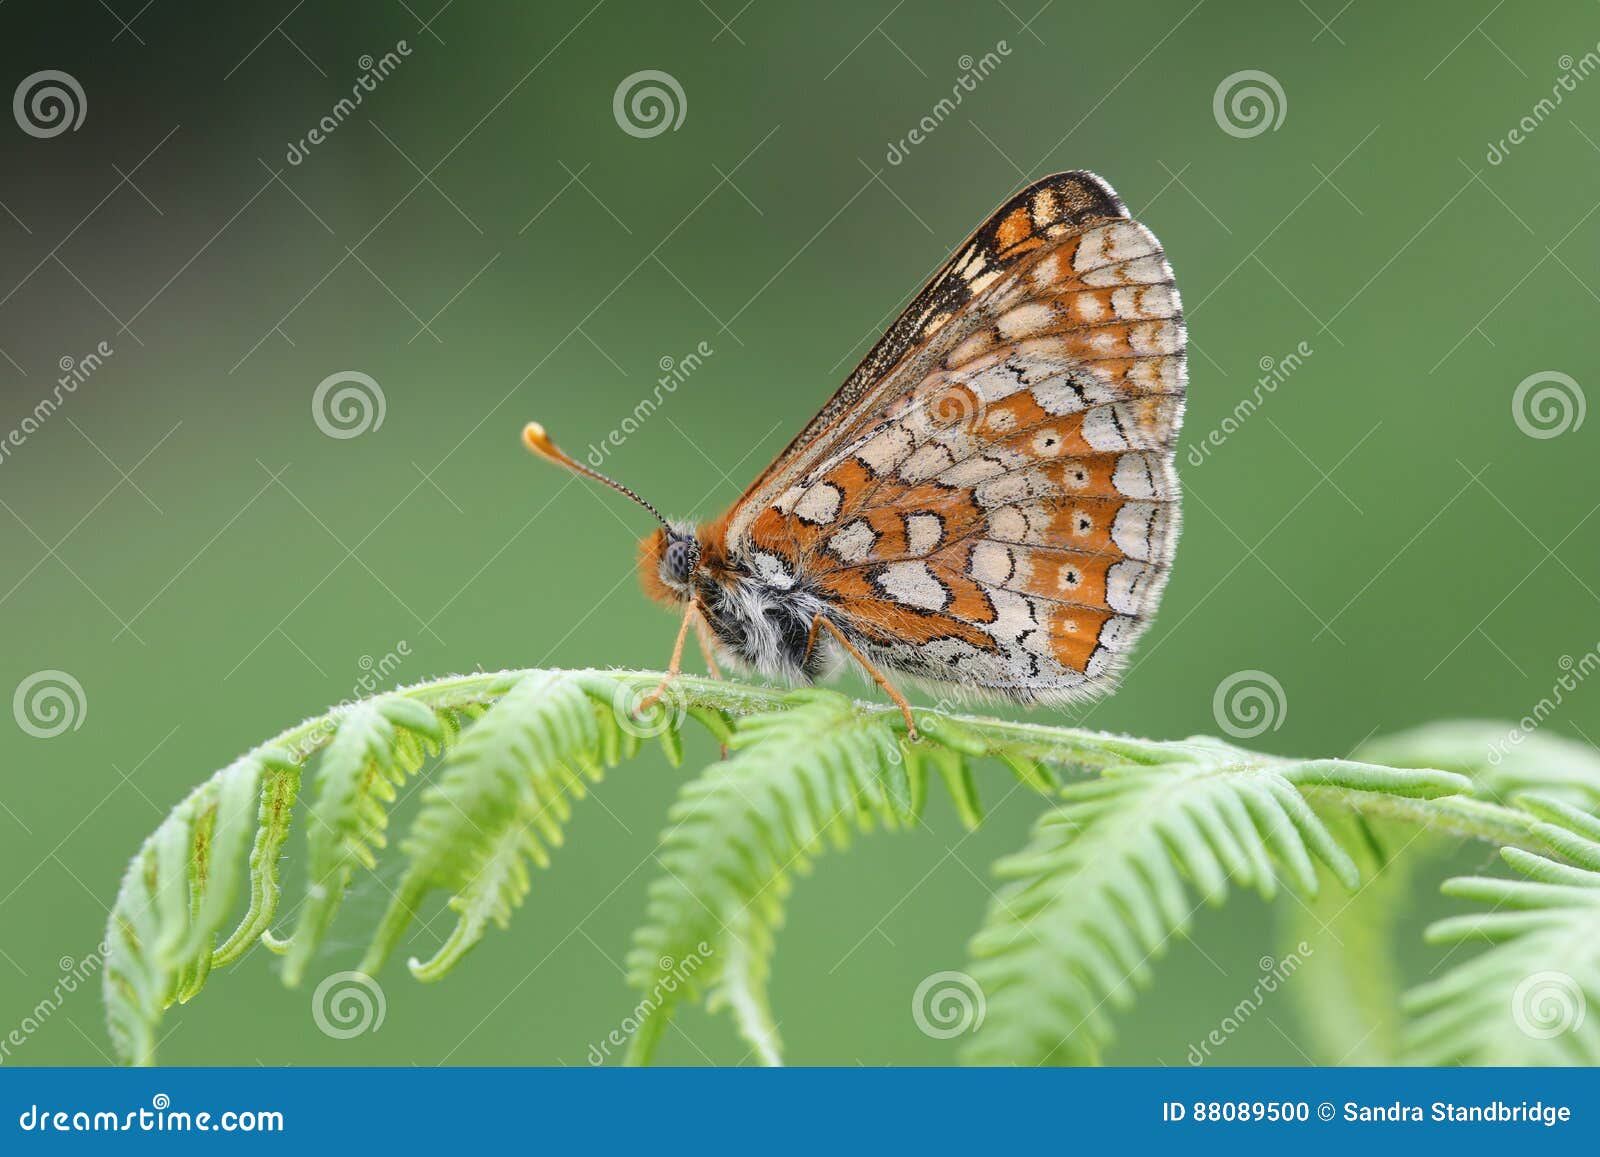 the side view of a rare marsh fritillary butterfly, euphydryas aurinia, perched on bracken.